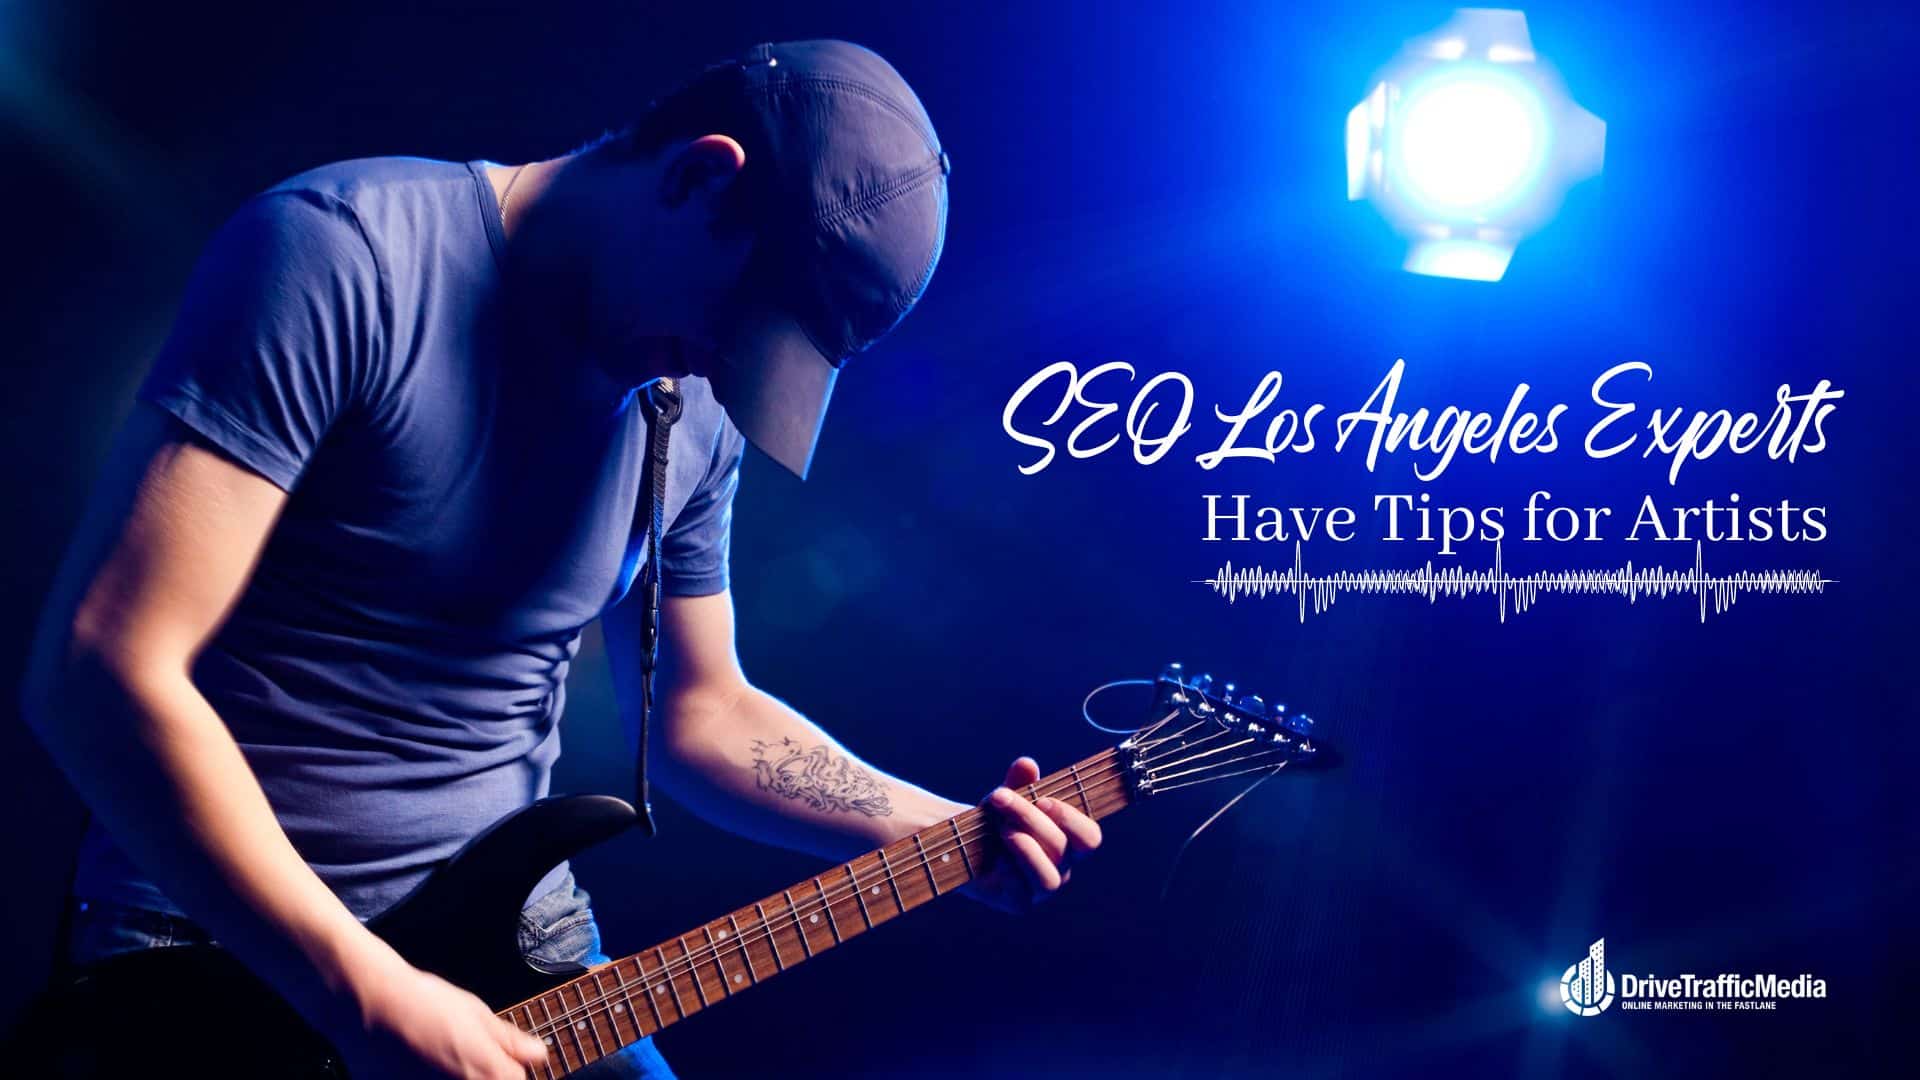 how-to-boost-artists-online-presence-according-to-seo-experts-in-los-angeles